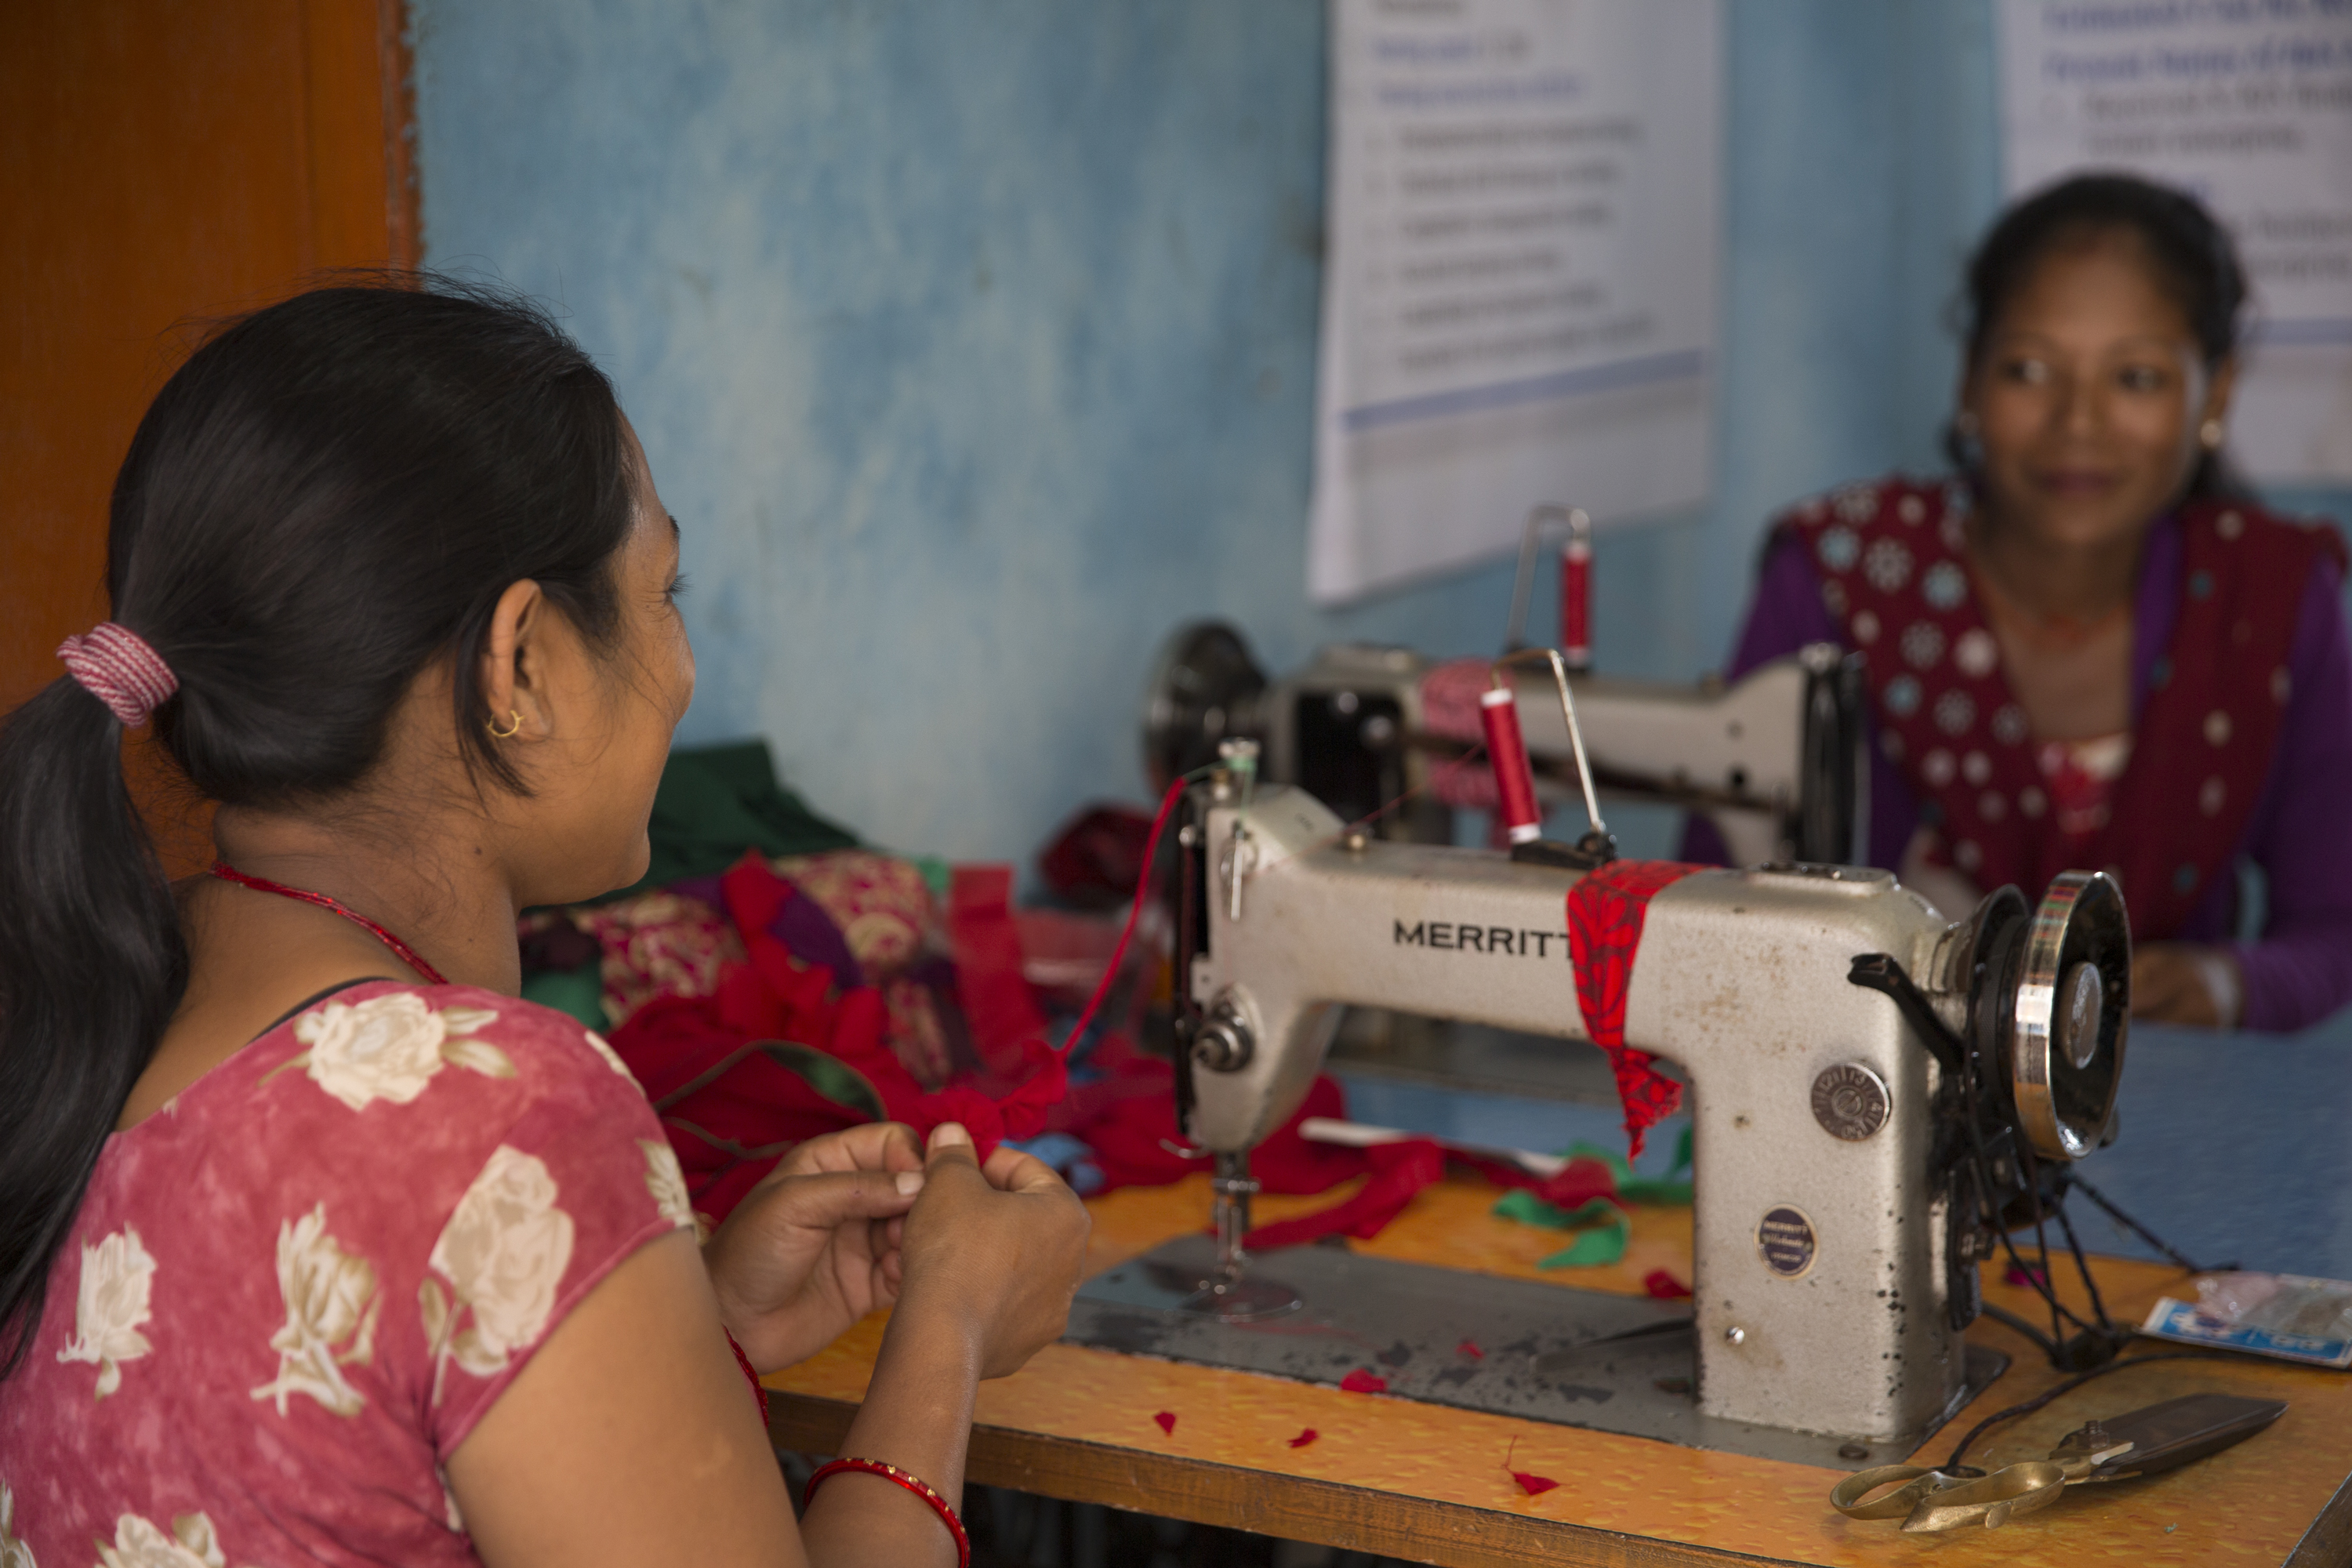 A custom order underway at a sewing shop, one venture created with help from the Micro-Enterprise Development Program (MEDEP).